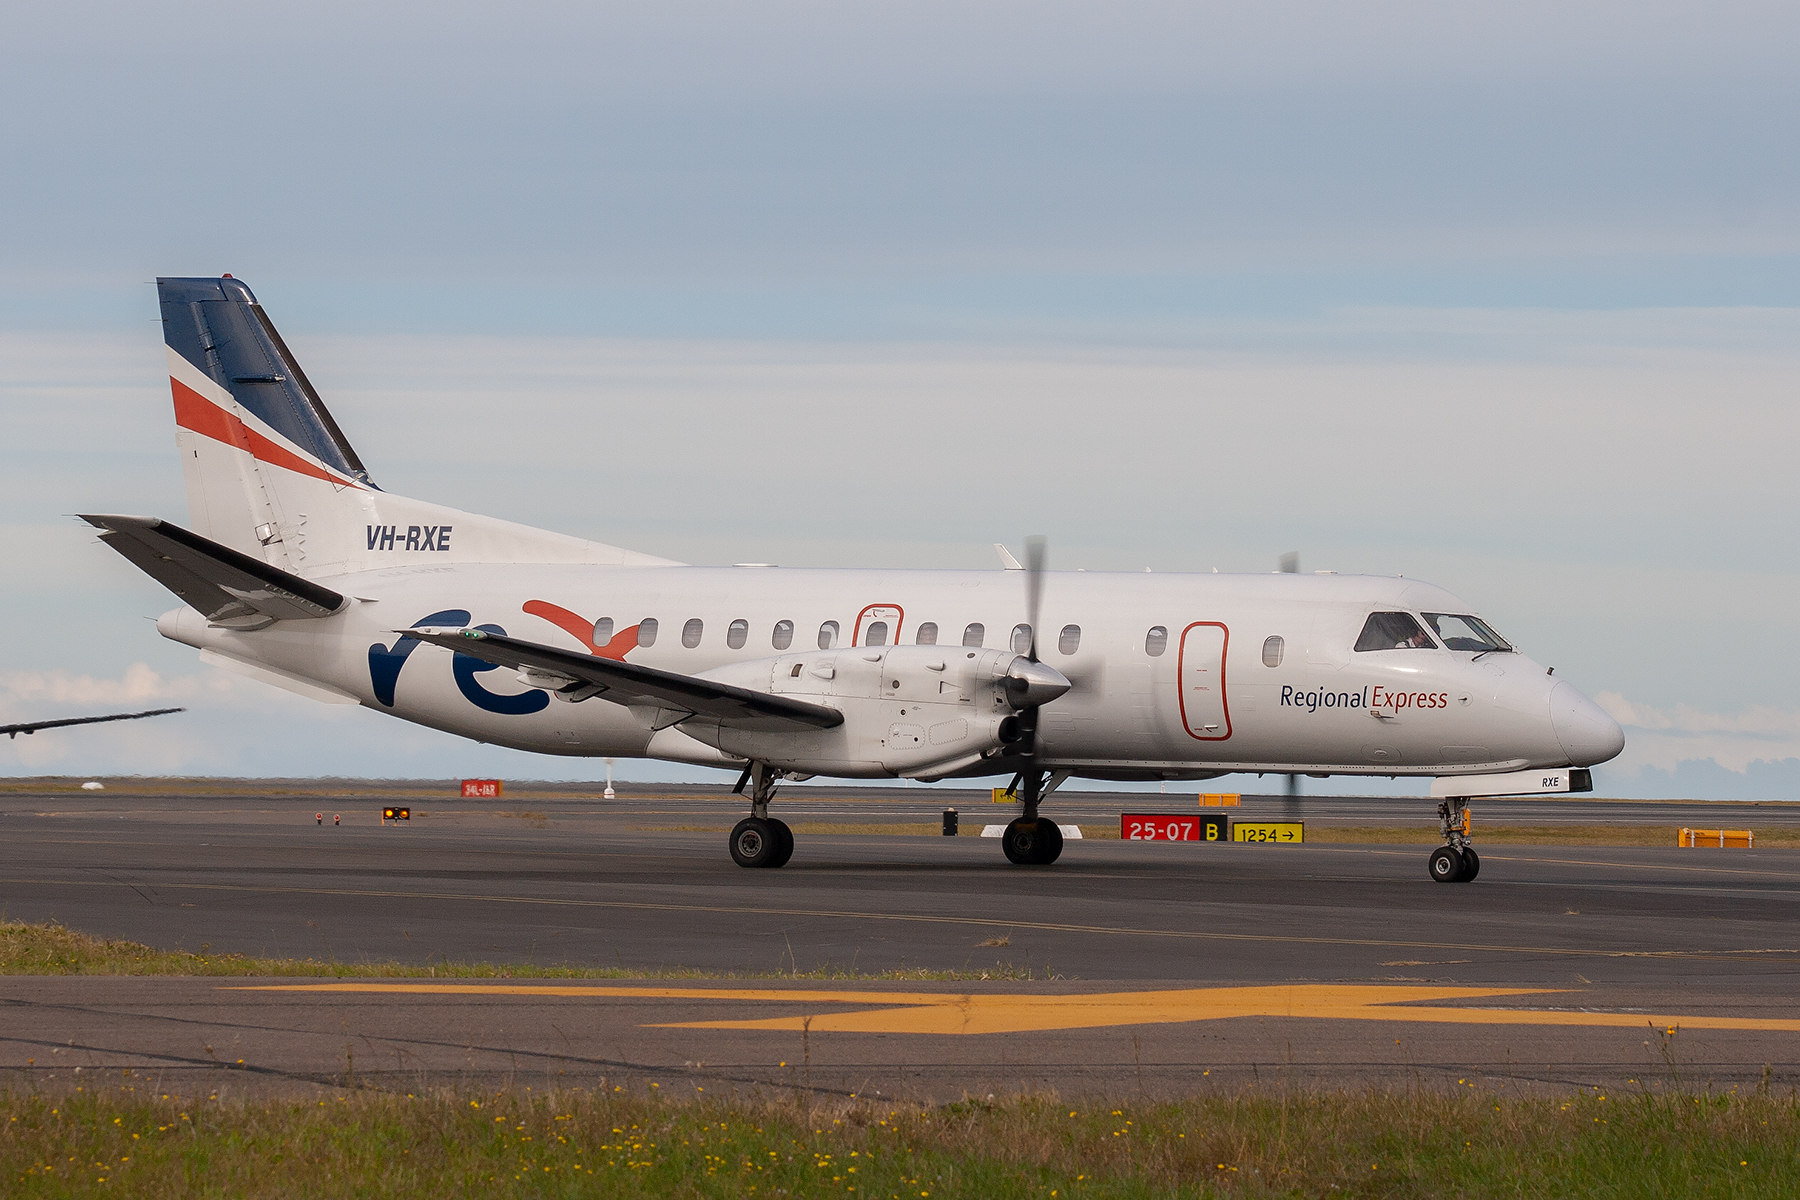 Rex Airlines Saab 340B VH-RXE at Kingsford Smith